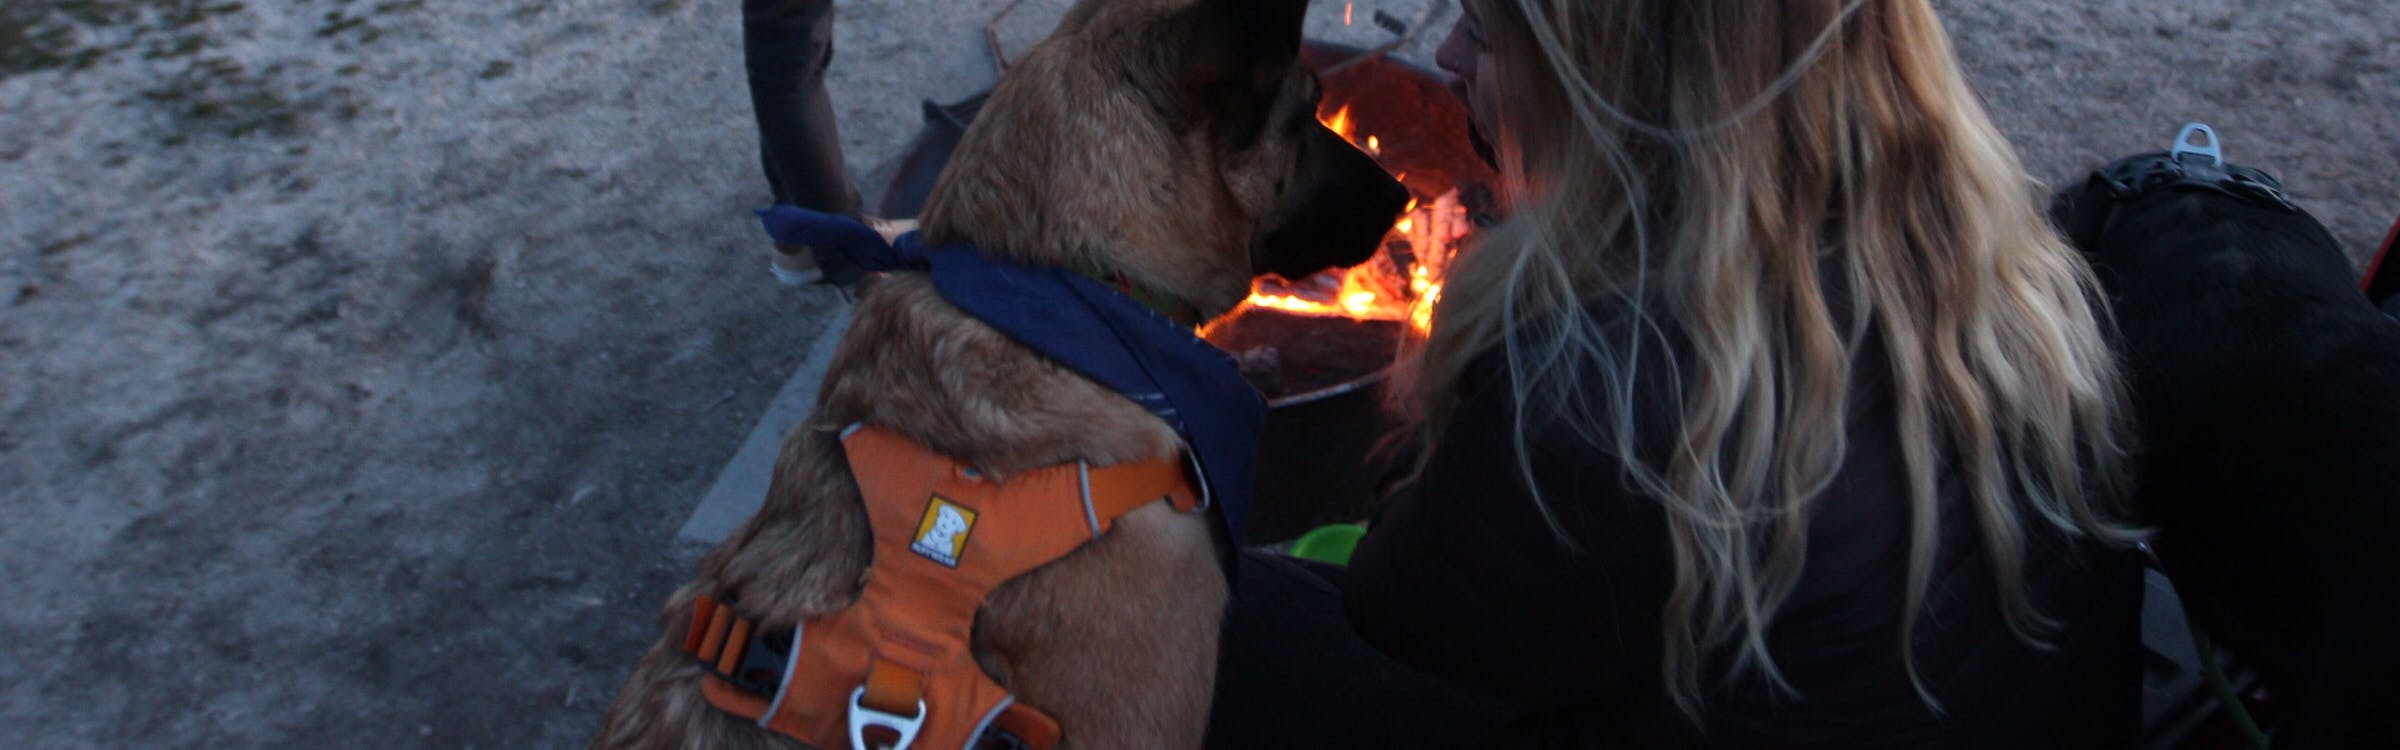 A woman and dog look at each other. The dog is wearing a harness and there is a fire in the background.